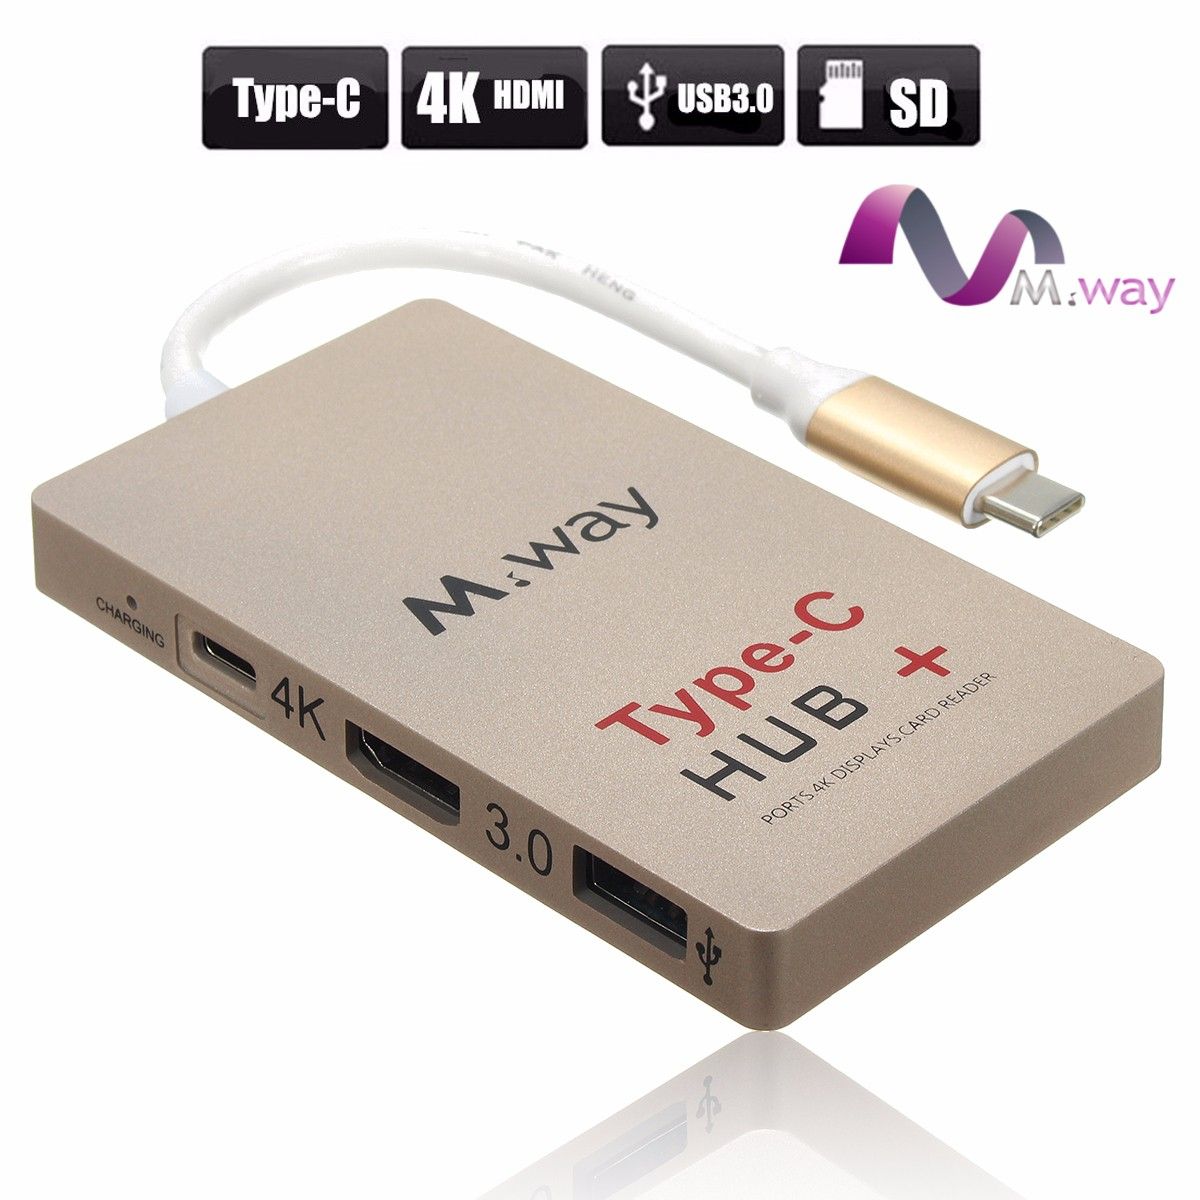 MWay-USB-31-Type-C-to-4k-HDMI-USB-30-HUB-USB-C-Charger-SD-Card-Reader-Adapter-1092890